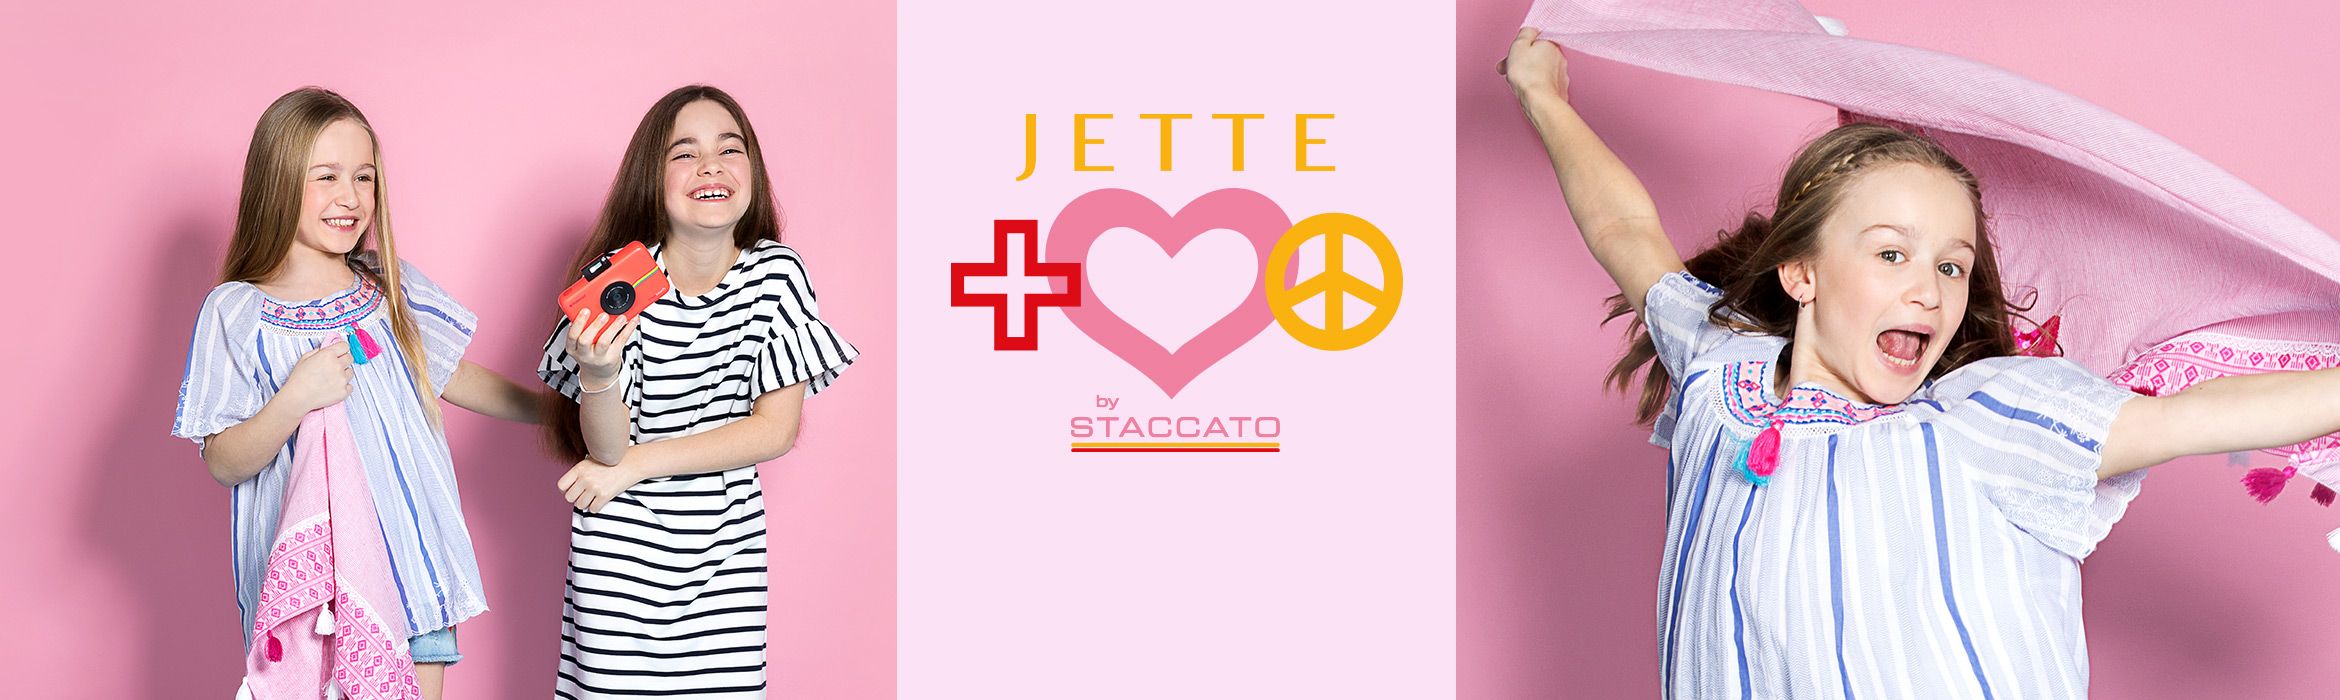 JETTE by Staccato Kindermode